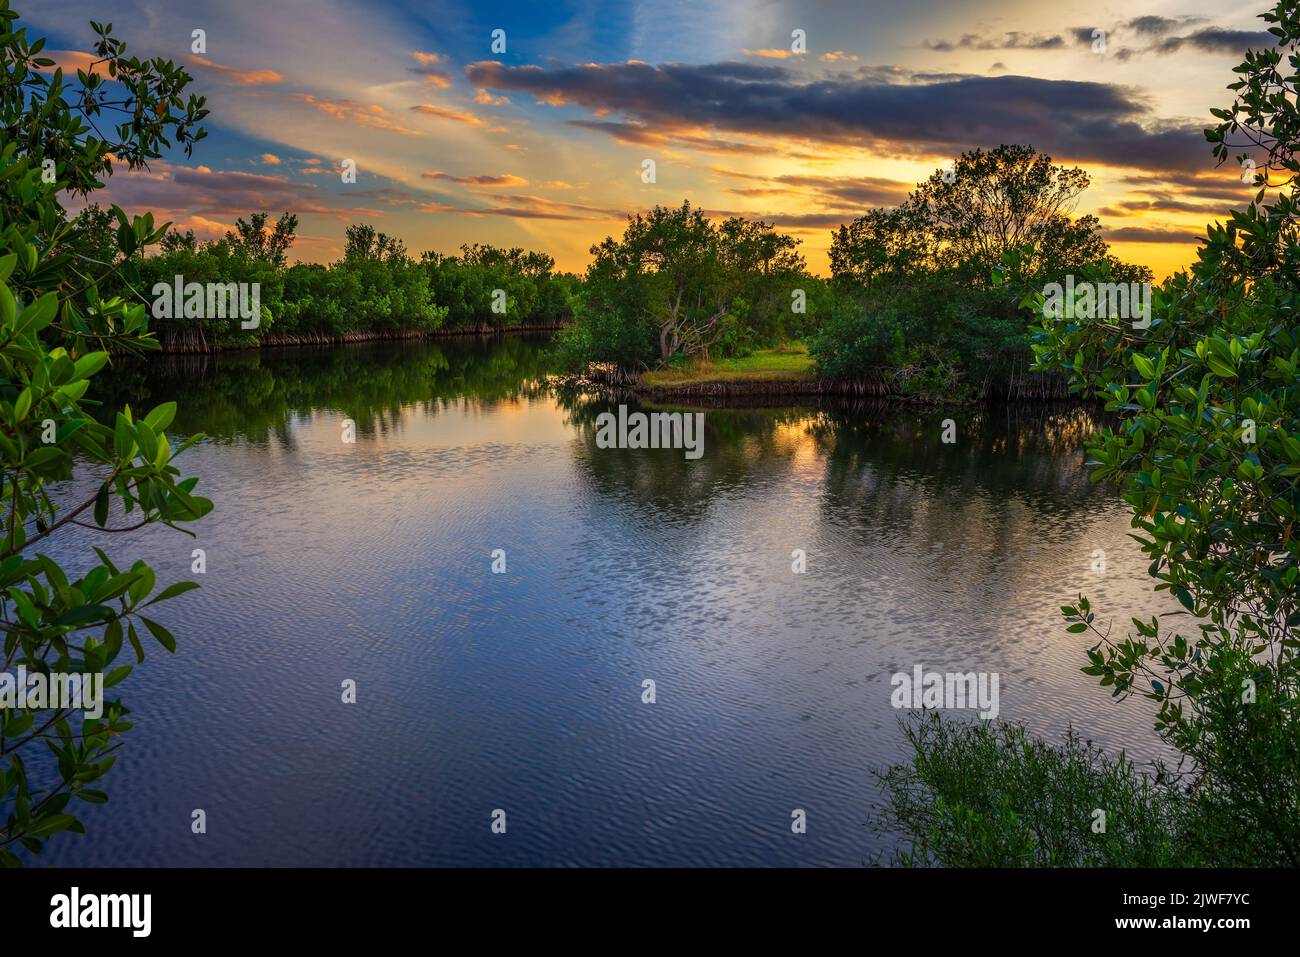 Colorful sunset over a lake in Everglades National Park, Florida Stock Photo